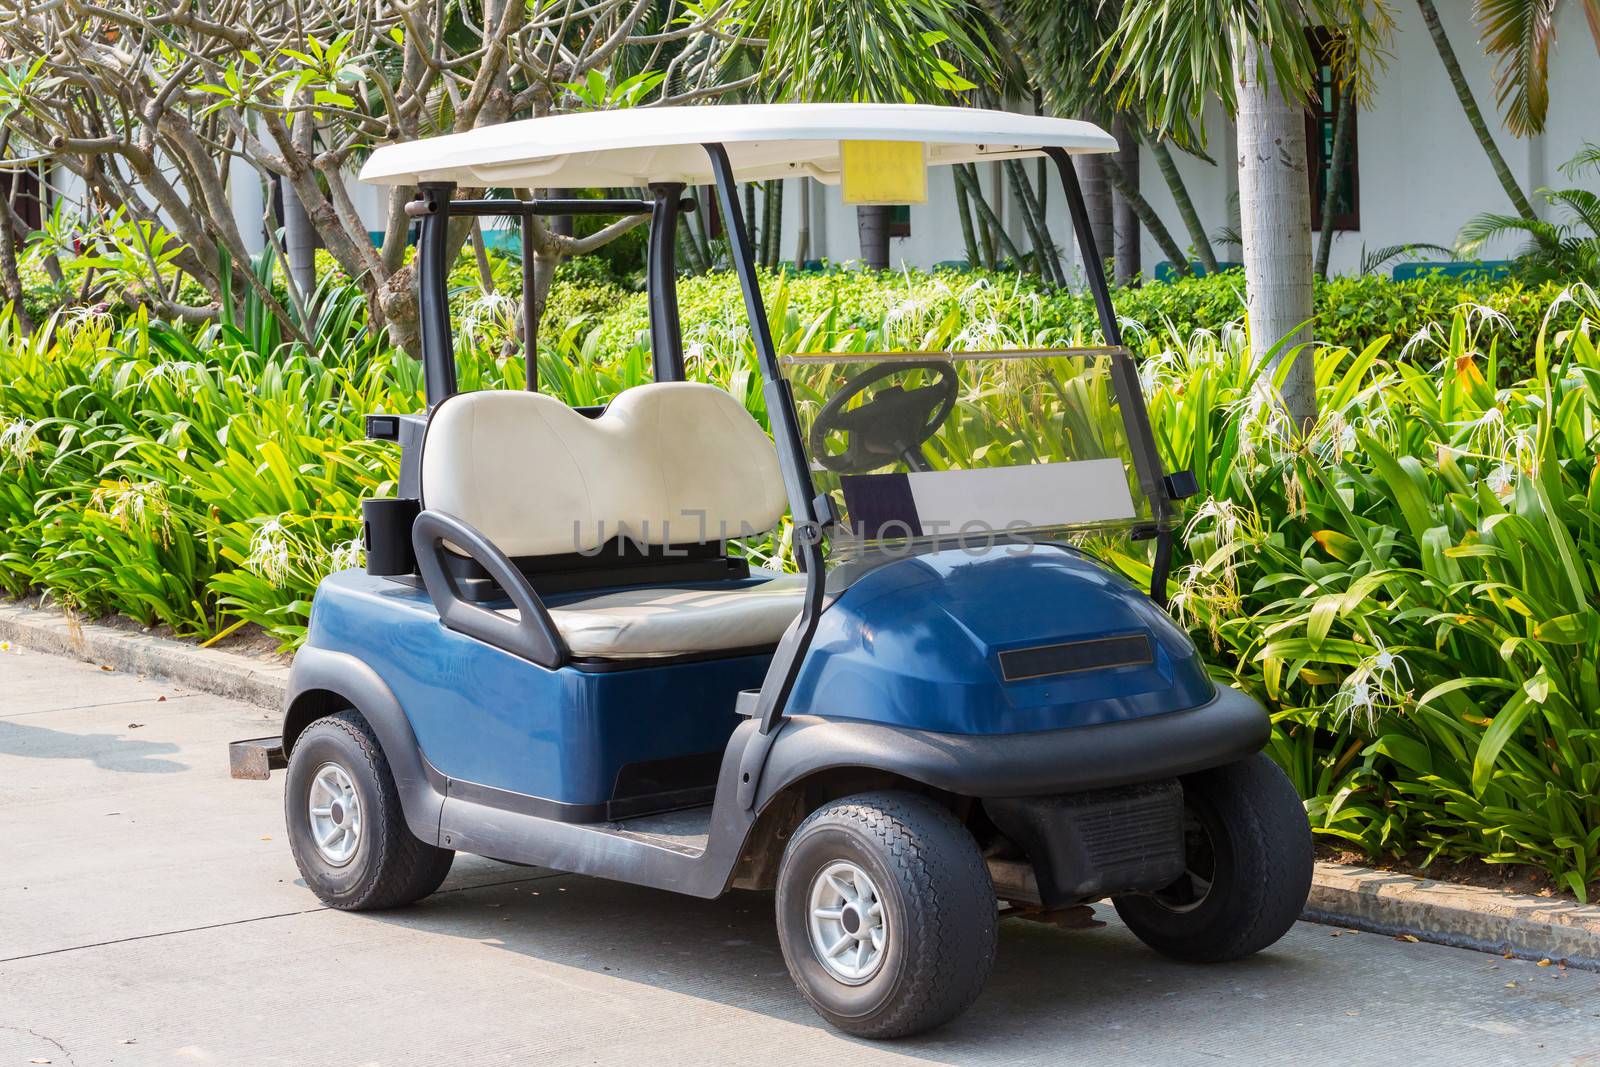 Golf cart by smuay